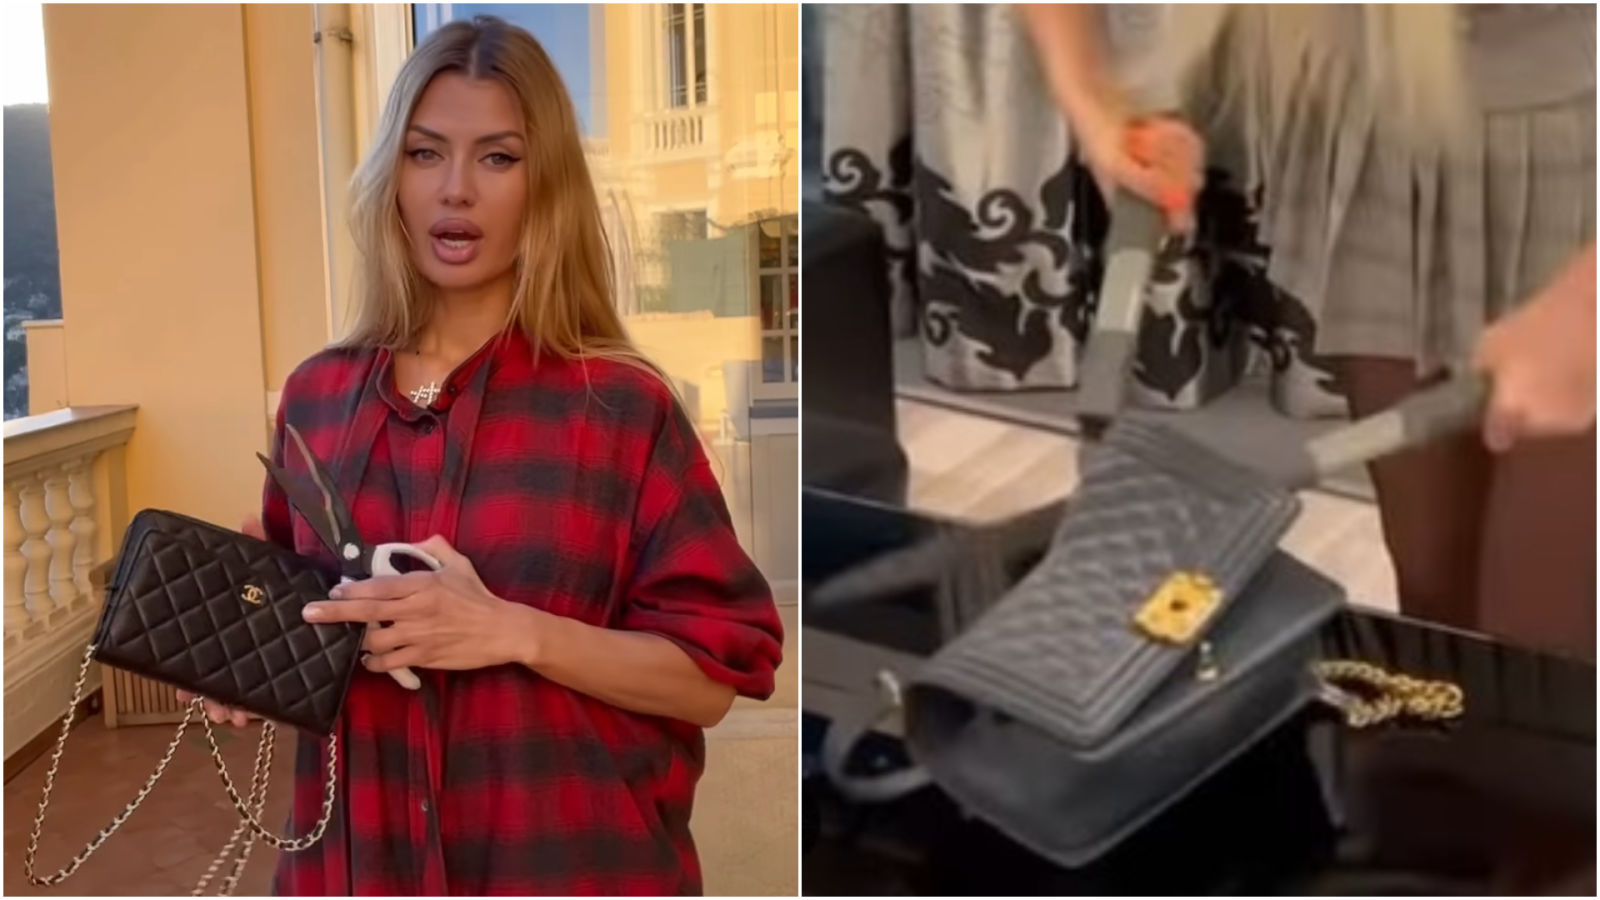 Russian influencers are cutting up their Chanel handbags in protest